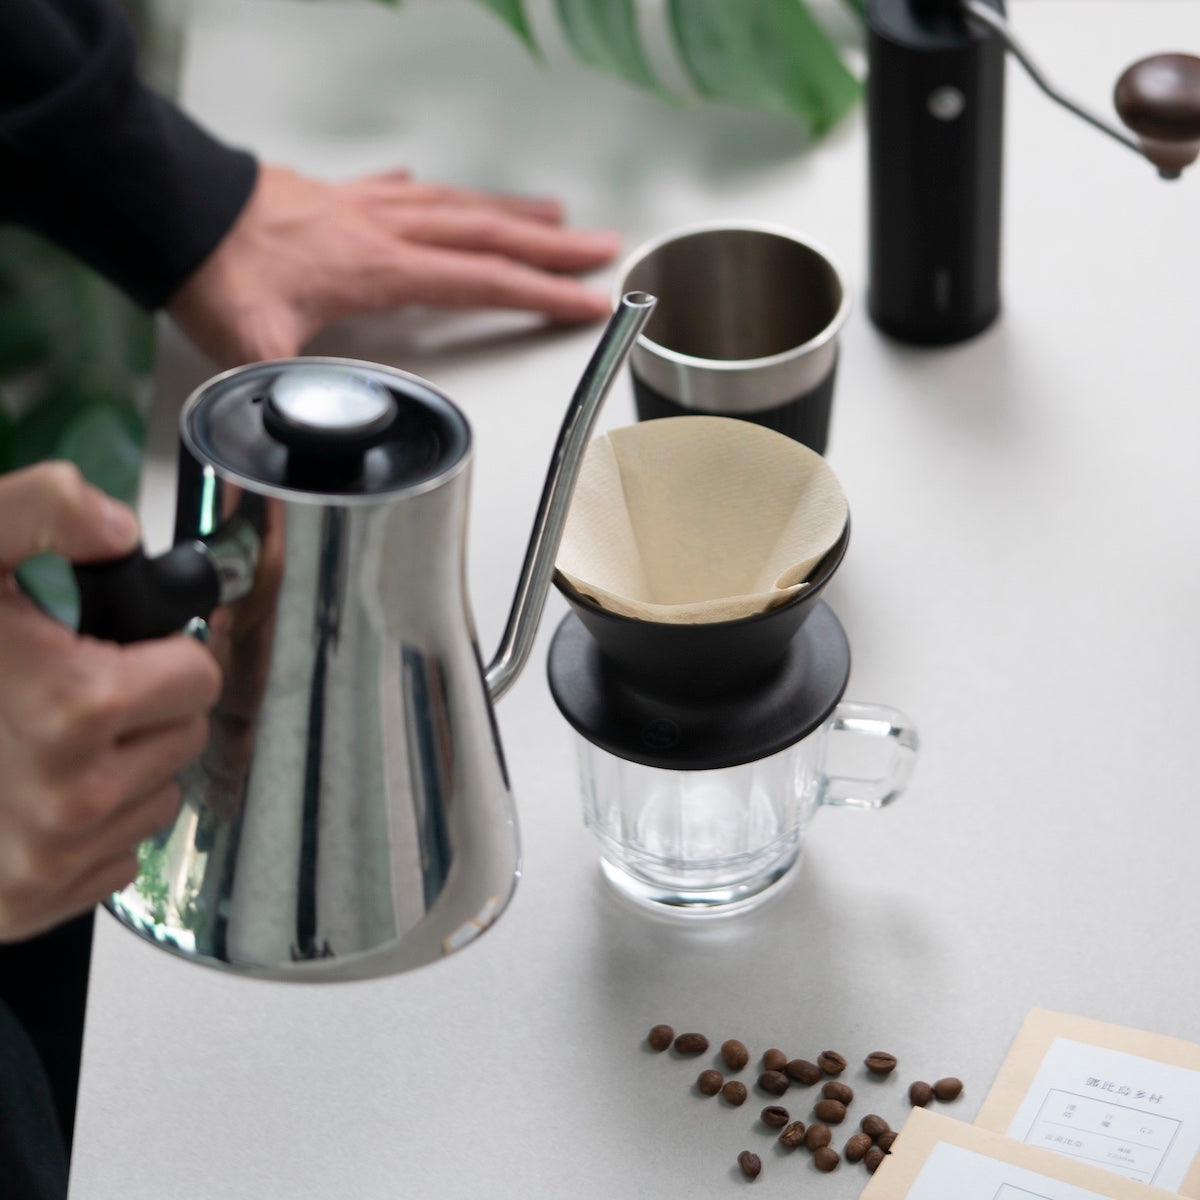 HMM Patio Dripper Lifestyle | THE COFFEE GOODS